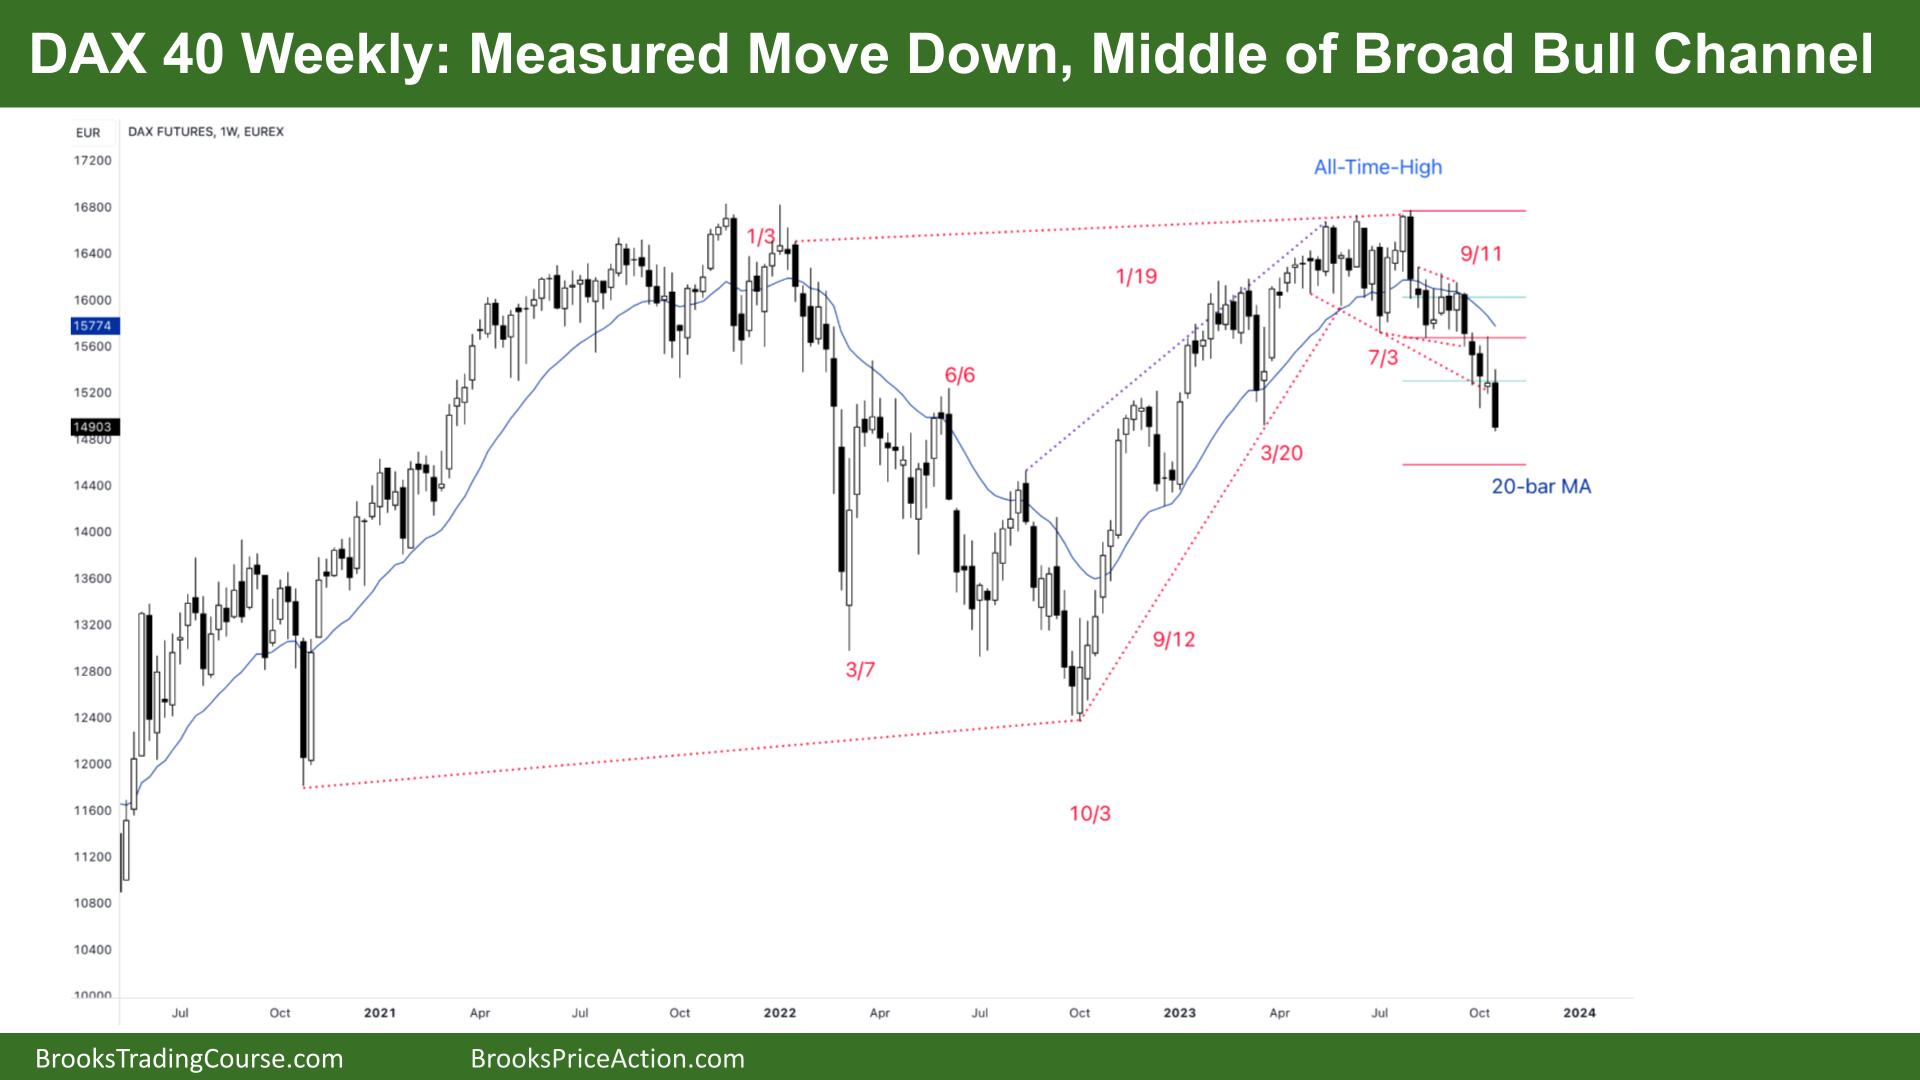 DAX 40 Measured Move Down, Middle of Broad Bull Channel 